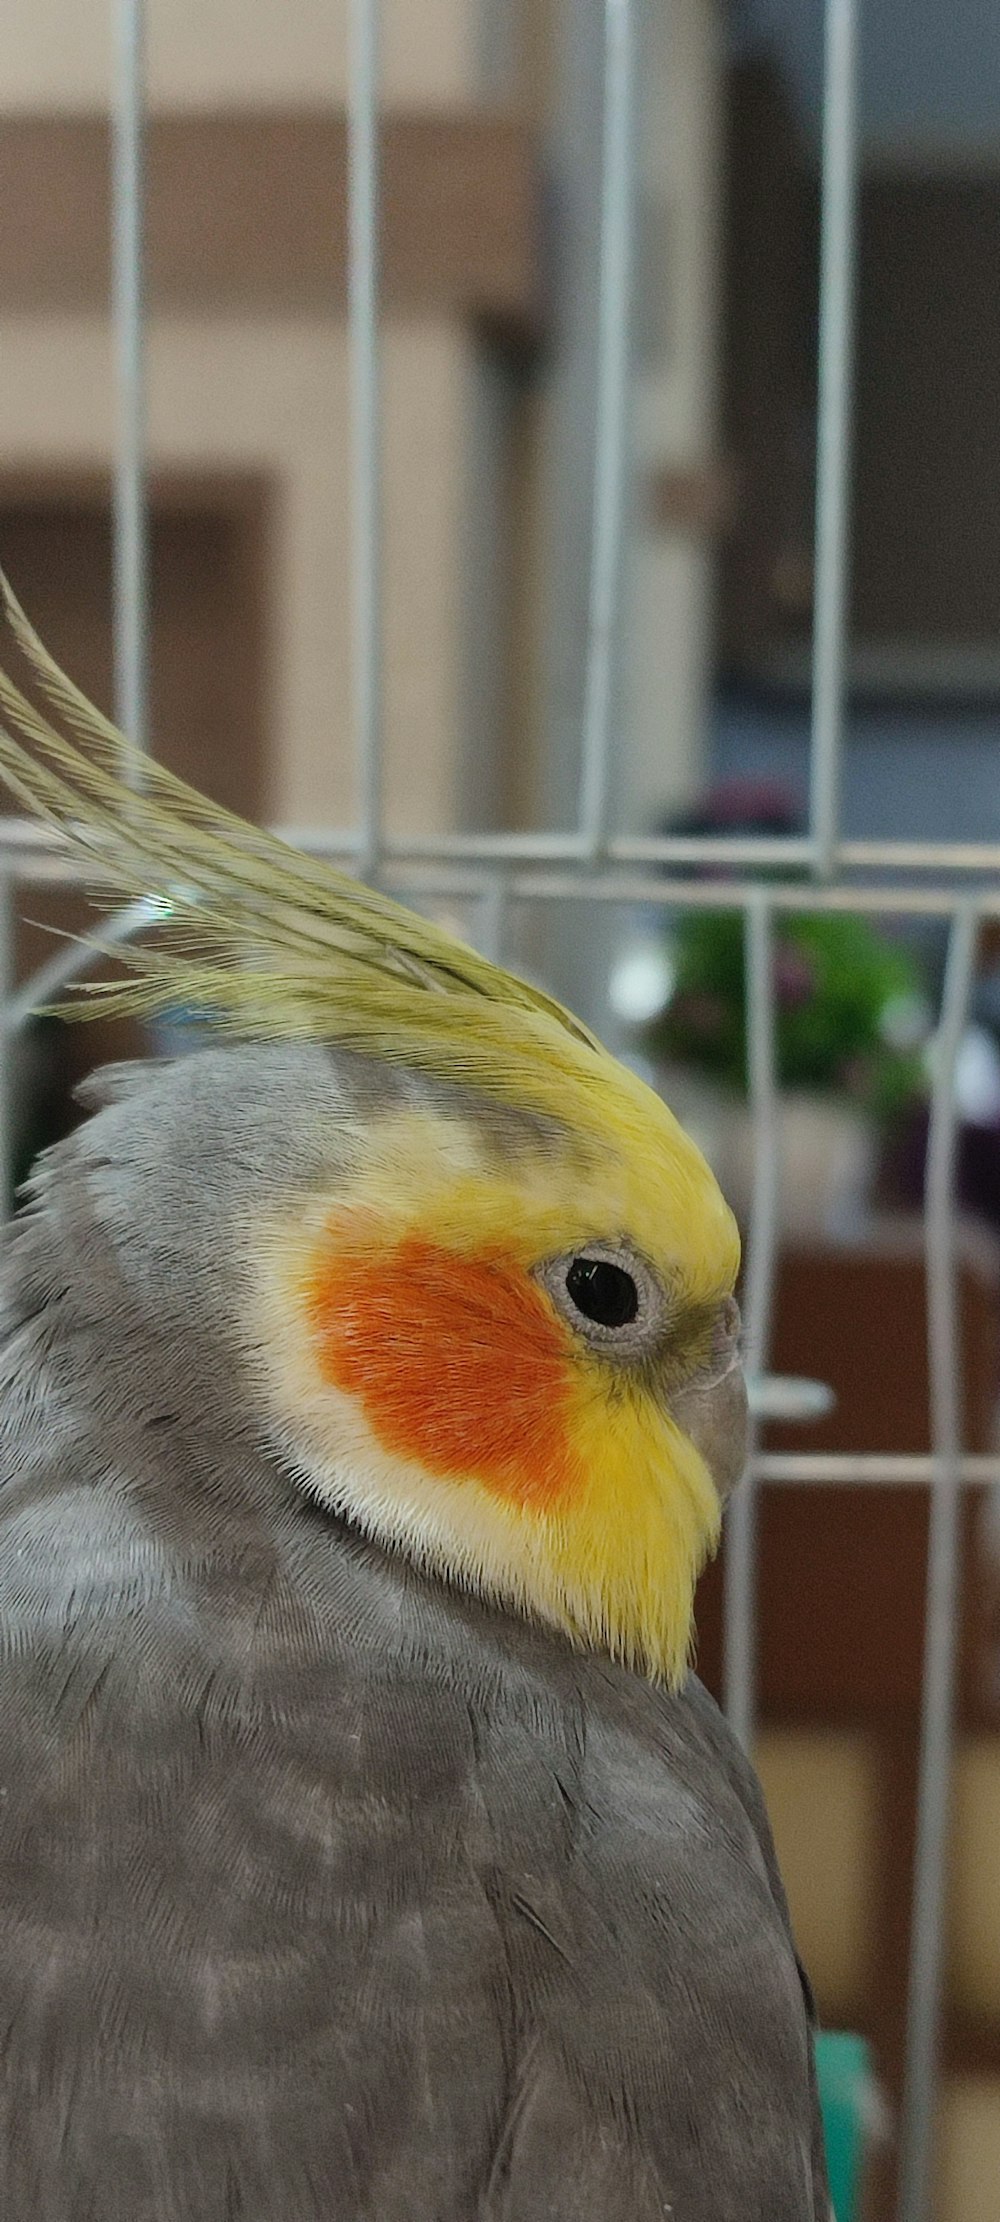 a bird with a yellow and white head